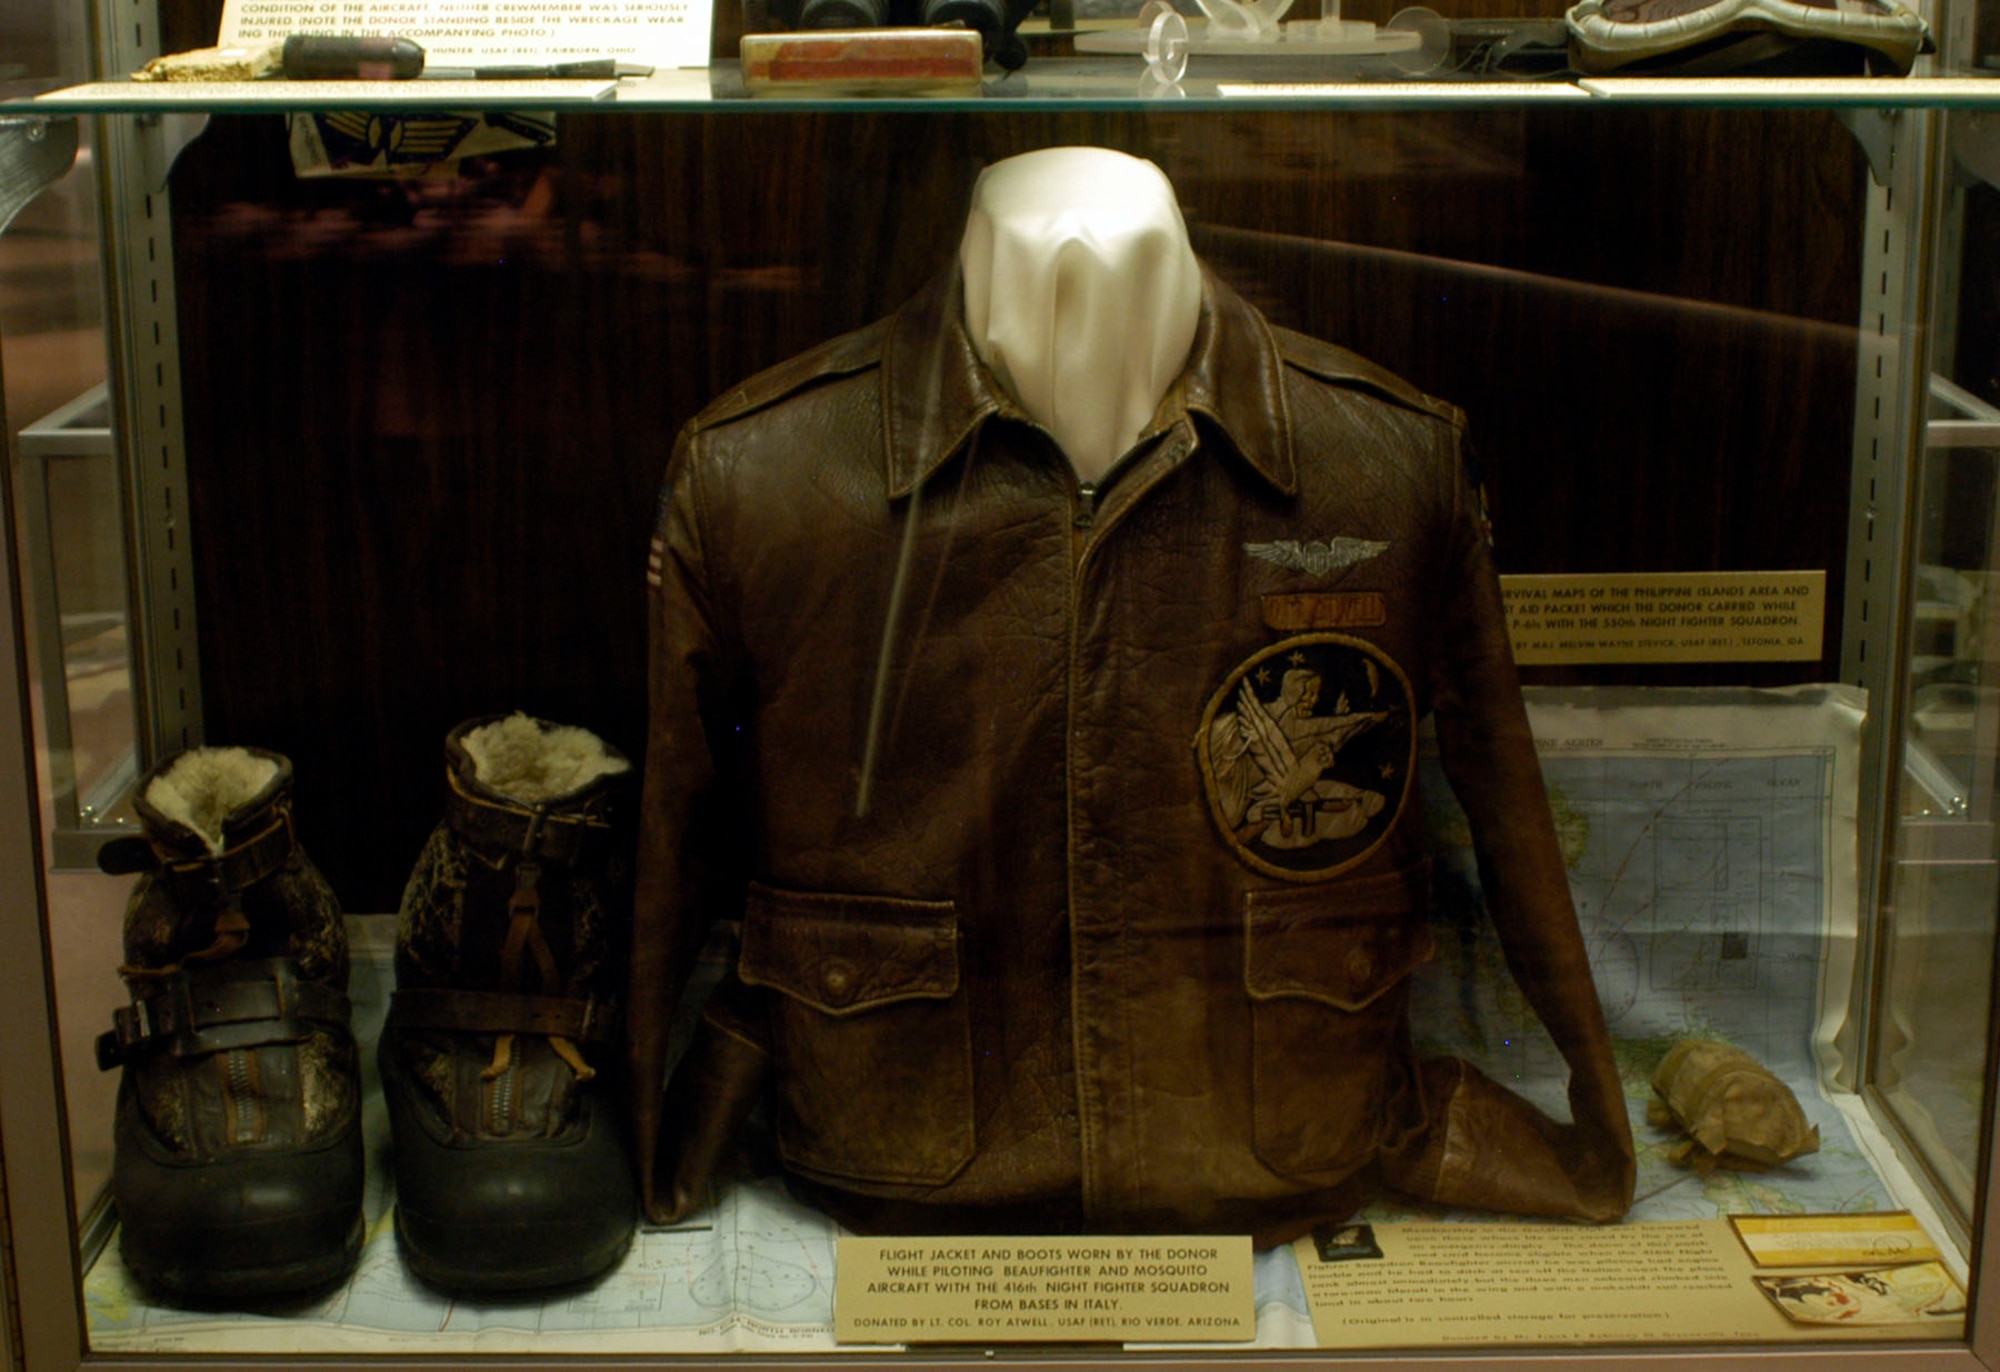 DAYTON, Ohio -- Flight jacket and boots worn by the donor while piloting the Beaufighter and Mosquito aircraft with the 416th Night Fighter Squadron from bases in Italy. Items on display in the World War II Gallery at the National Museum of the U.S. Air Force were donated by Lt. Col. (Ret.) Roy Atwell. (U.S. Air Force photo) 